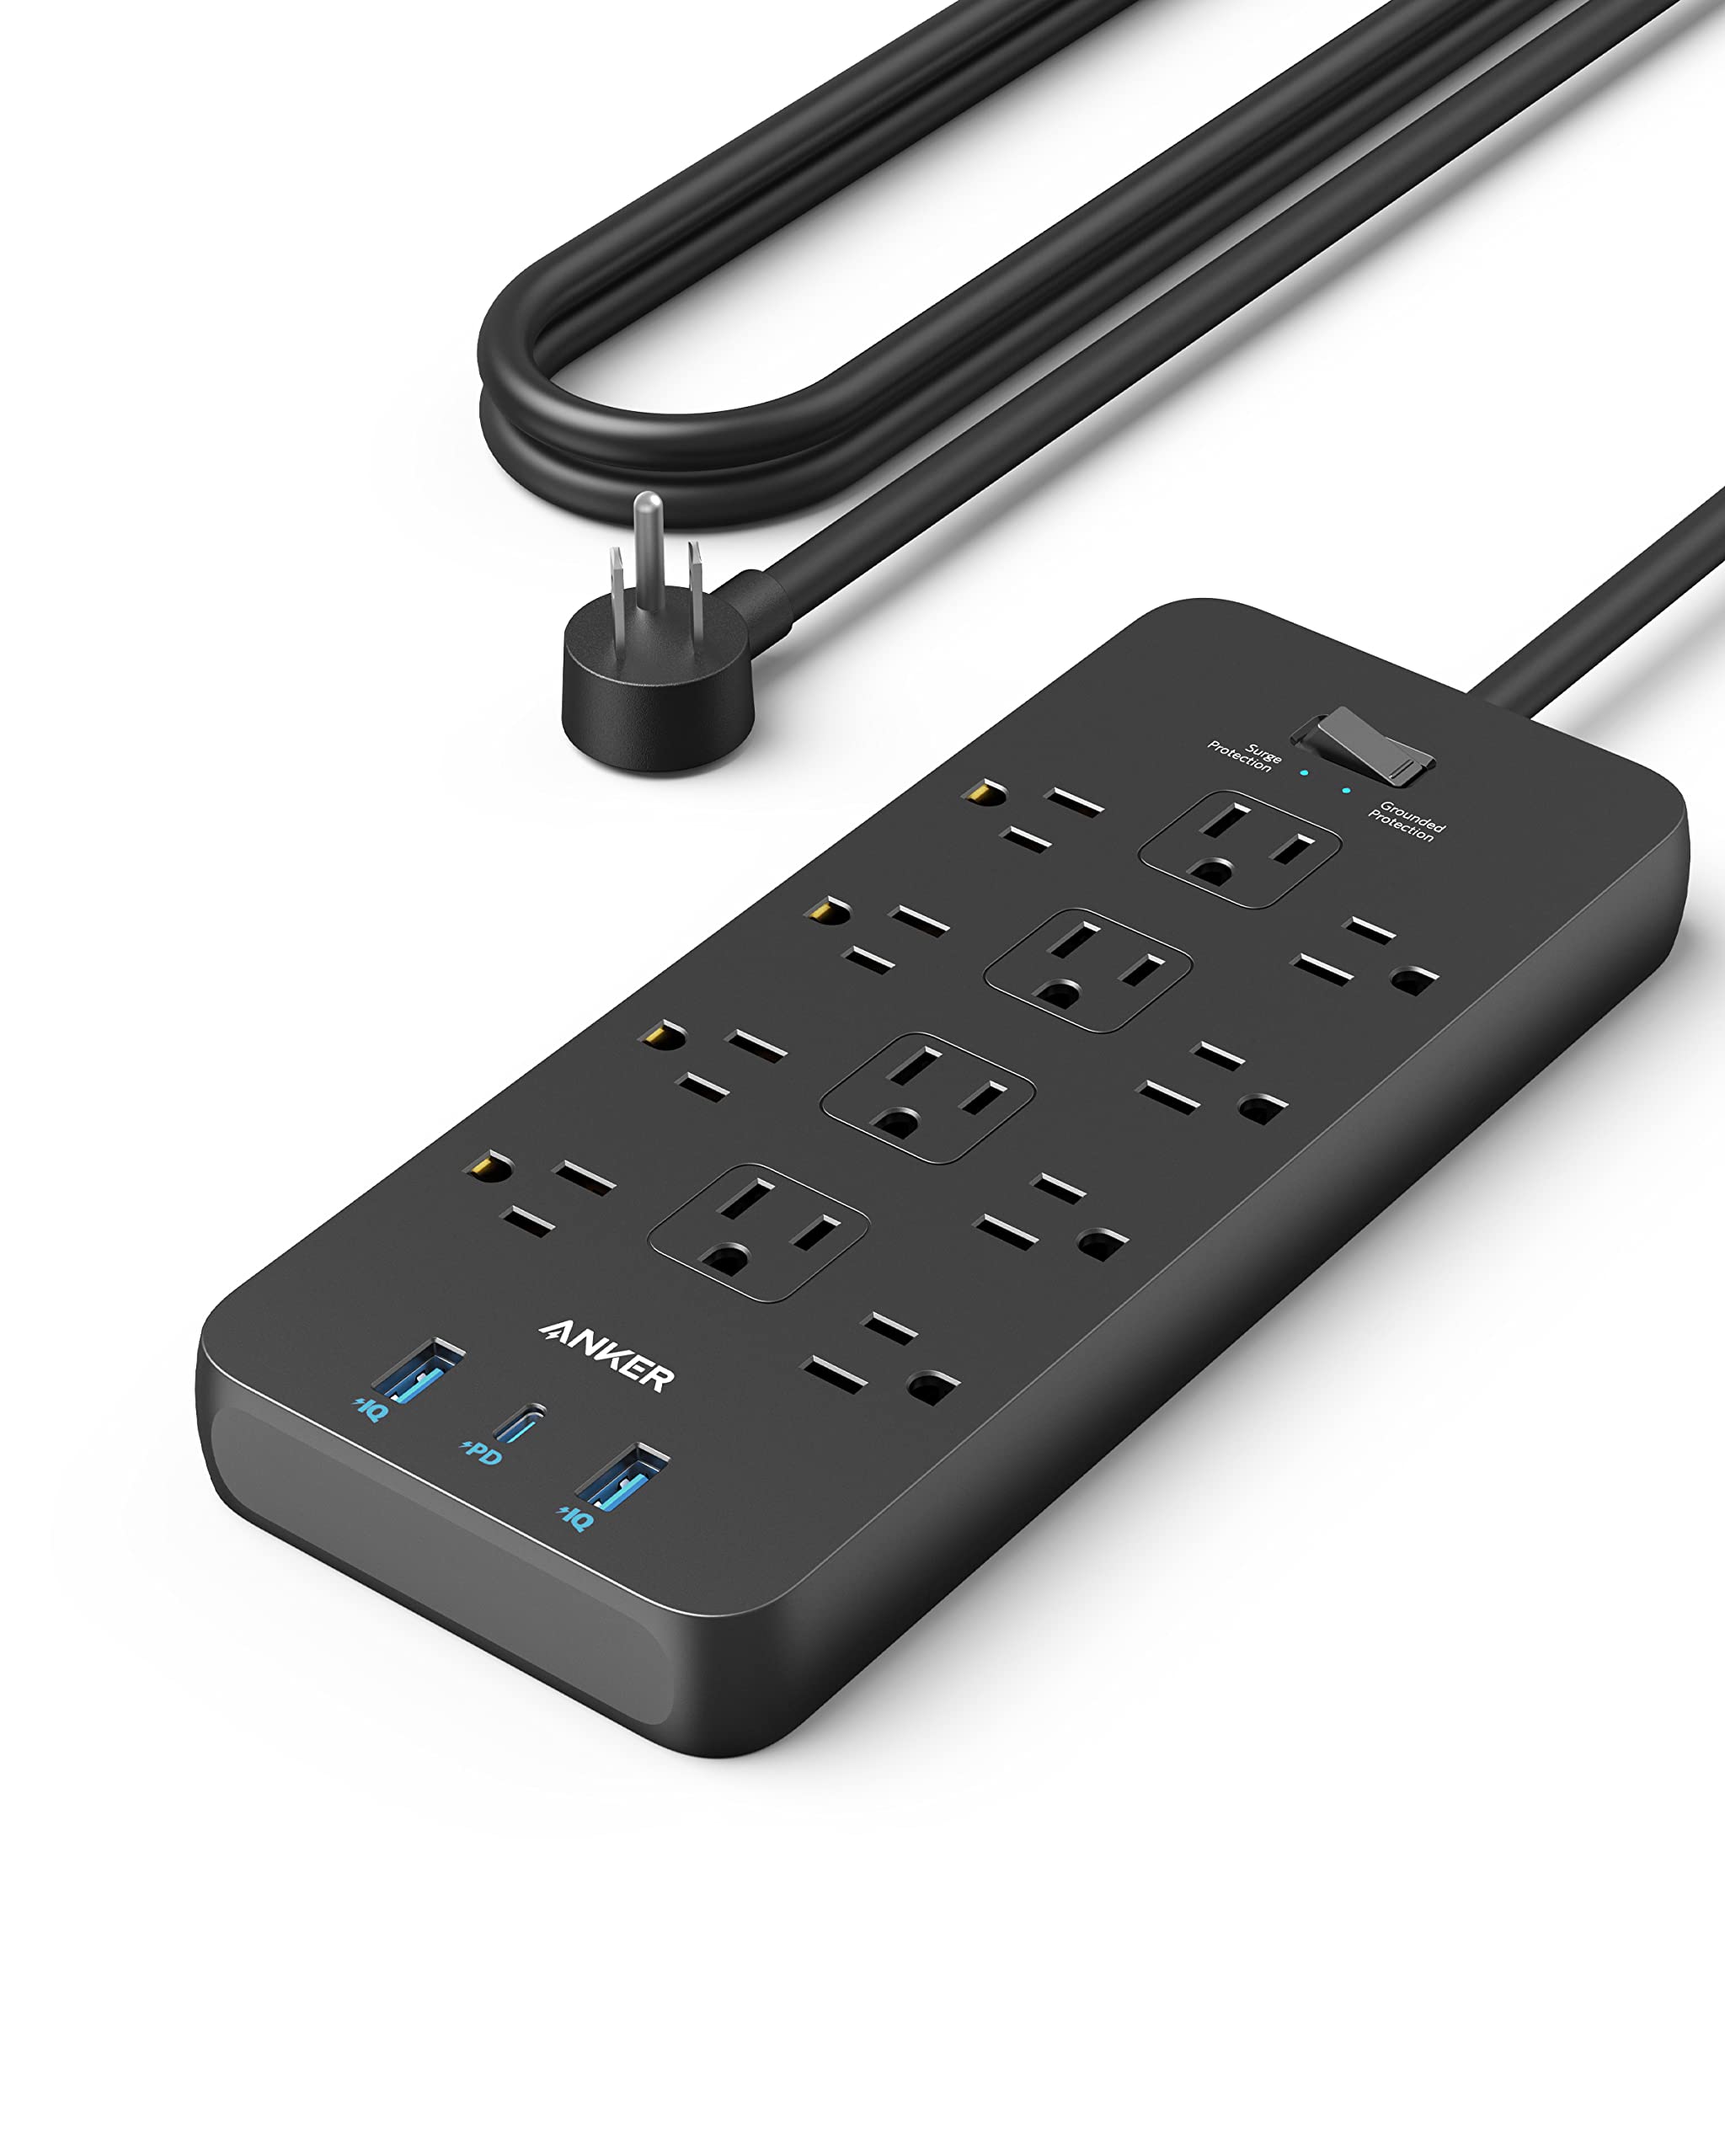 Prime Members: 5' Anker Power Strip 2100J 12-Outlet Surge Protector w/ 2x USB A + 1 USB C Port (Black) $22 + Free Shipping